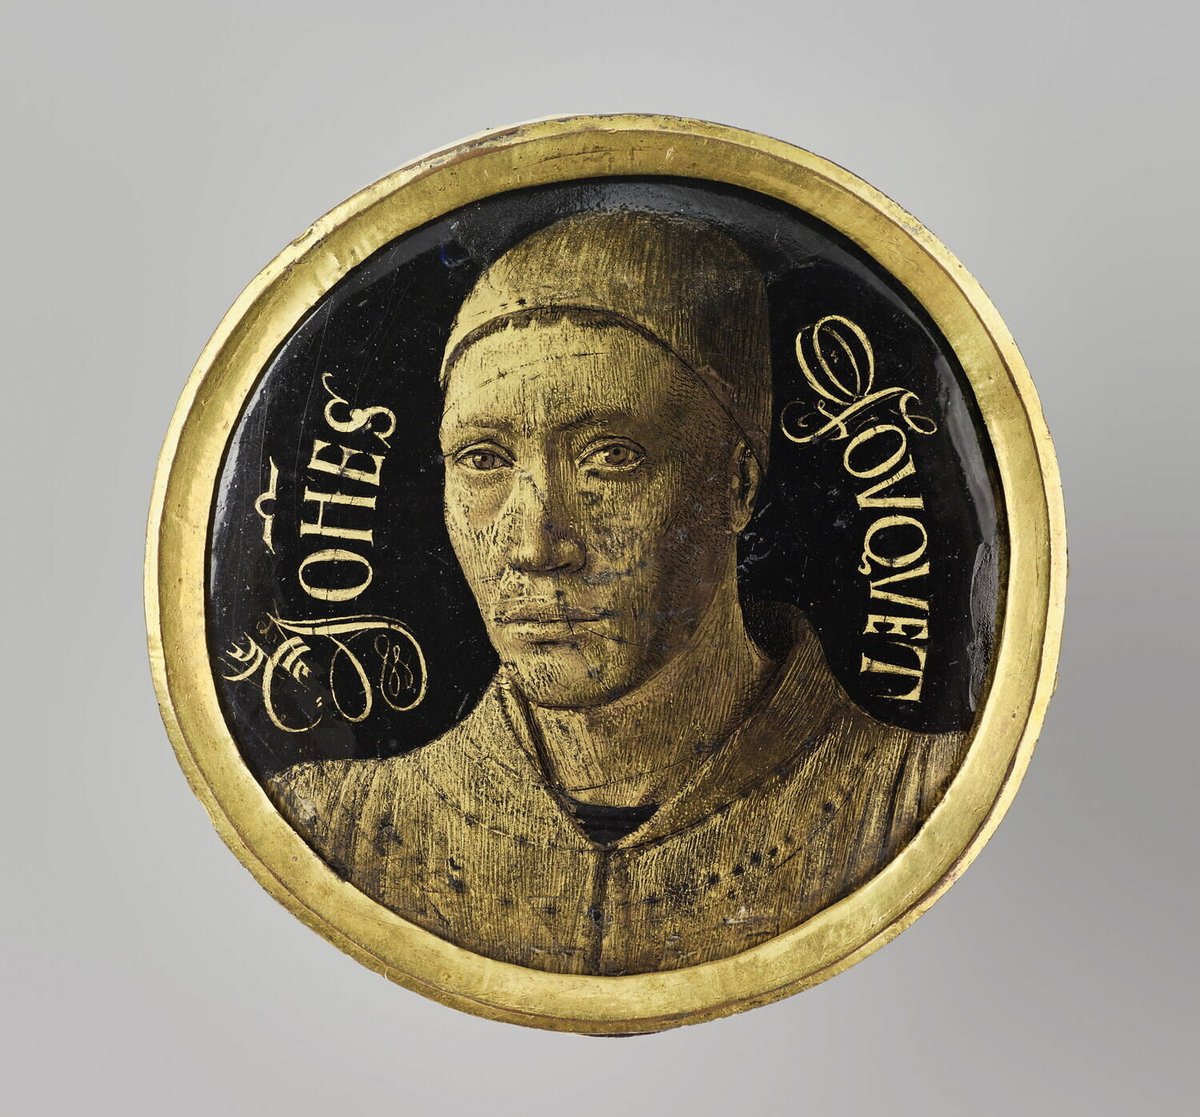 [#WorkOfTheDay]

Medallion: self-portrait of Jean Fouquet (c.1452 - 1455) 

📍 Richelieu Wing, Room 505
More info here 👉 bit.ly/3rwPCny

#DecorativeArts